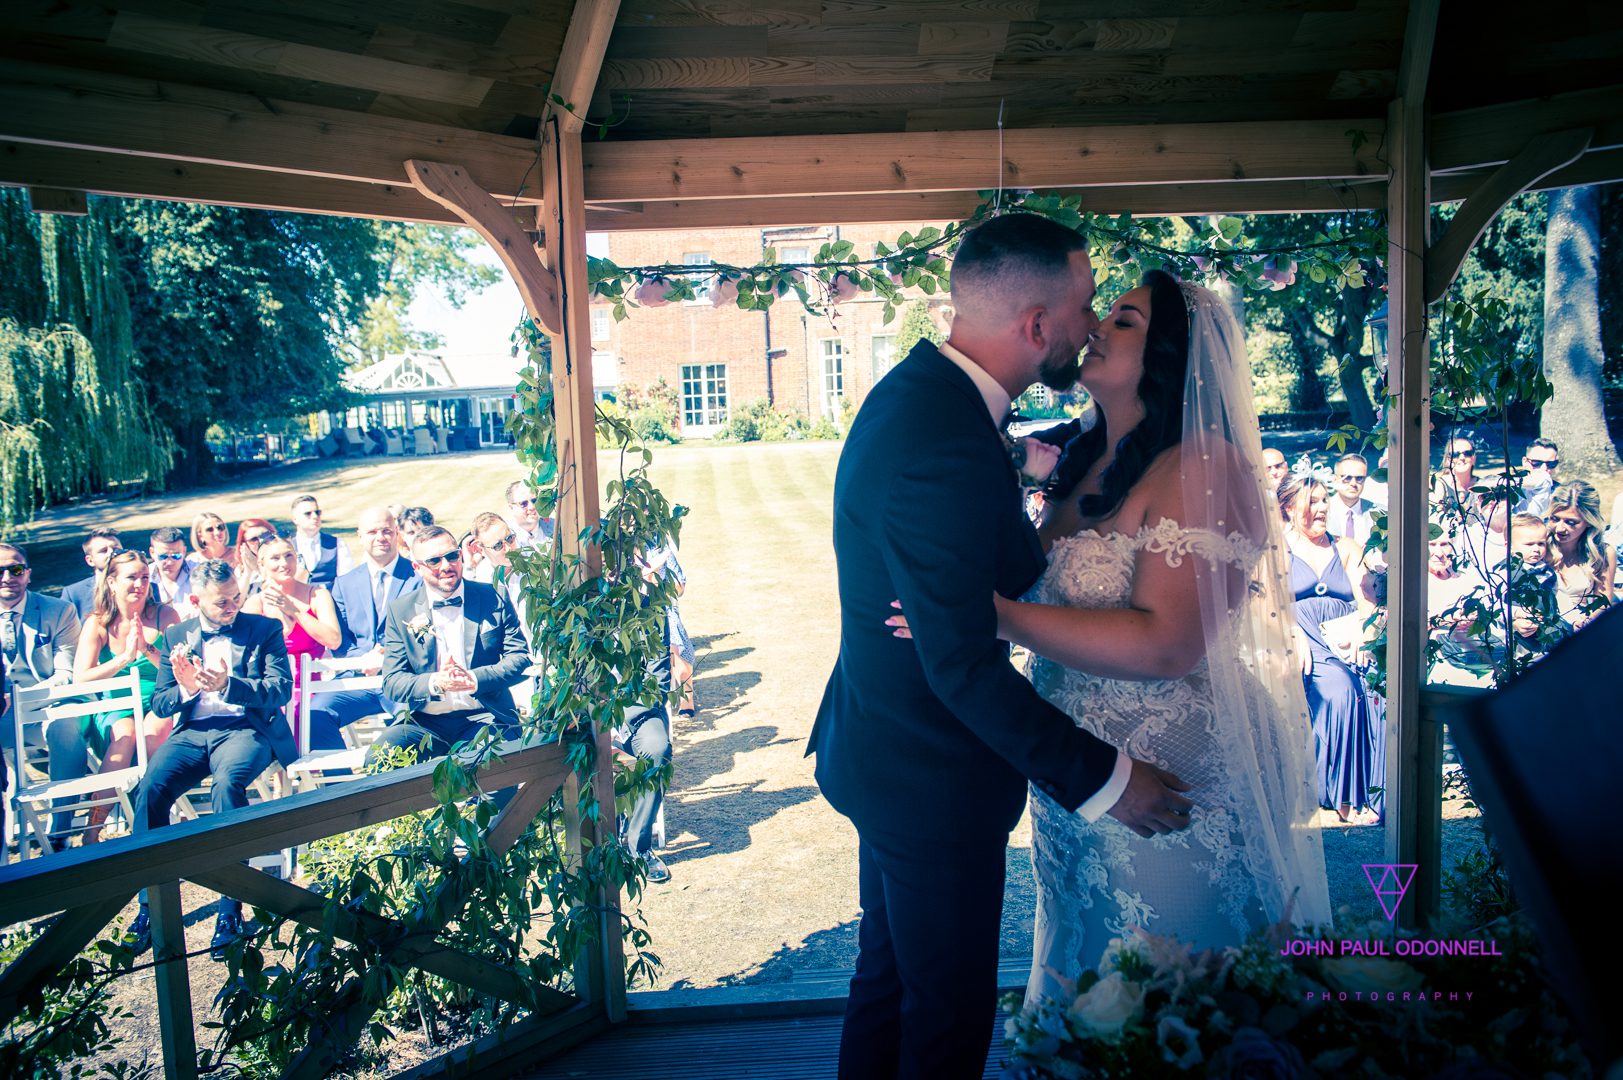 Lauren and Simons wedding at Mulberry House Essex